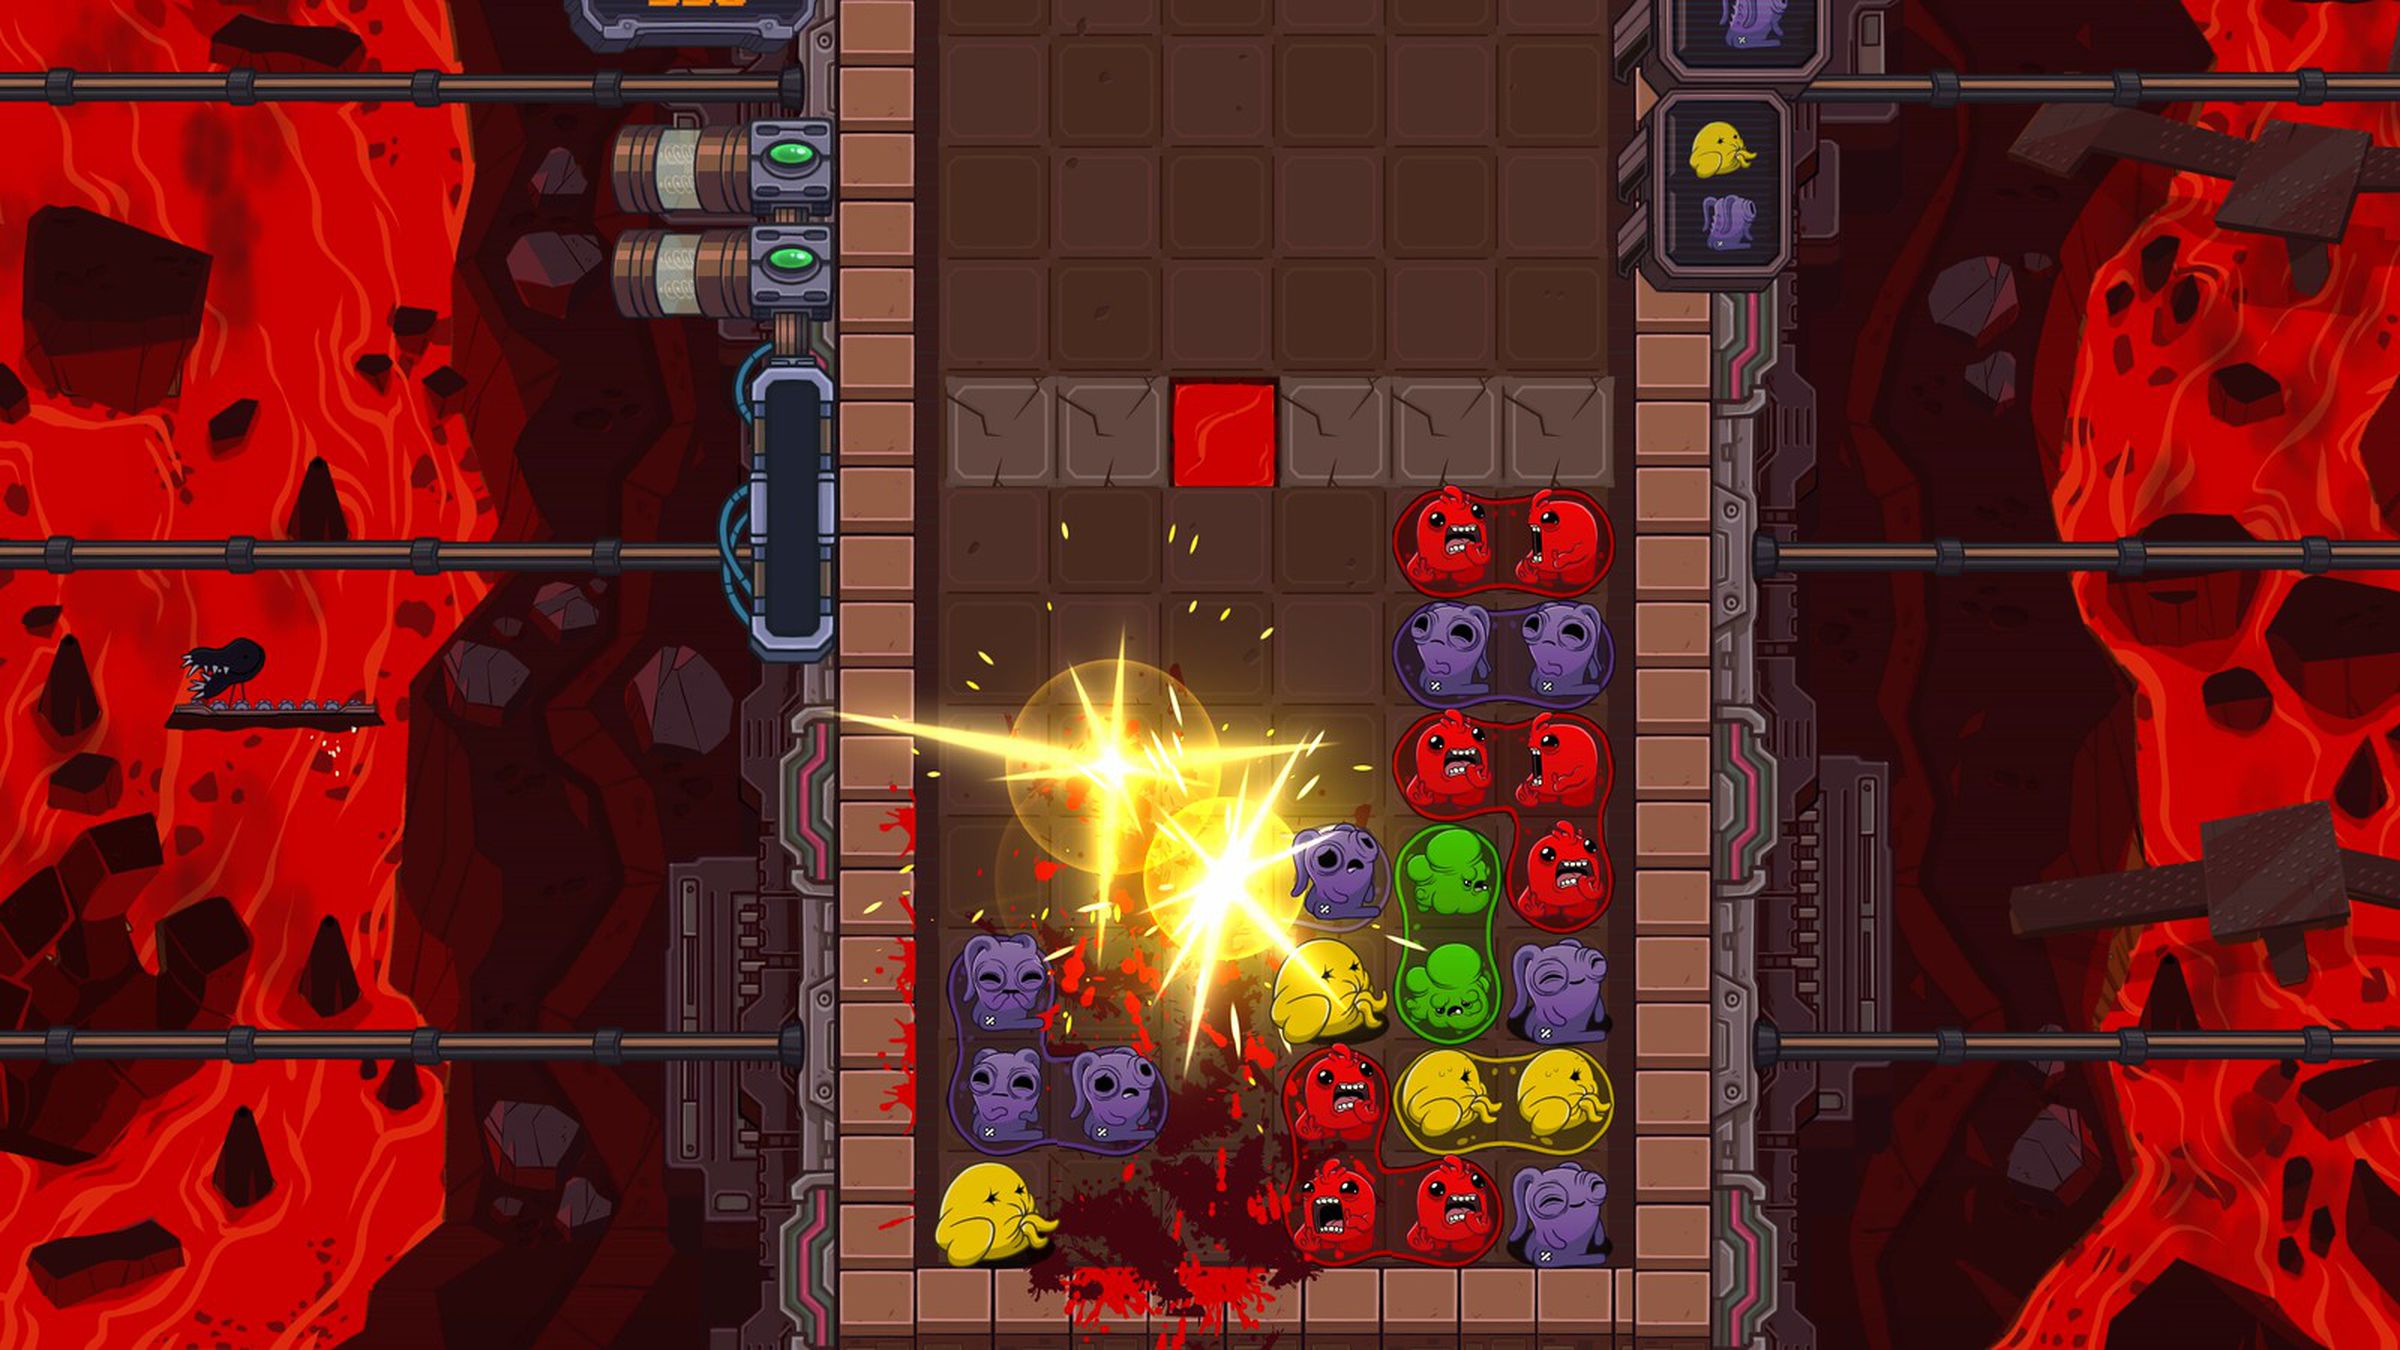 A screenshot from Dr. Fetus’ Mean Meat Machine.